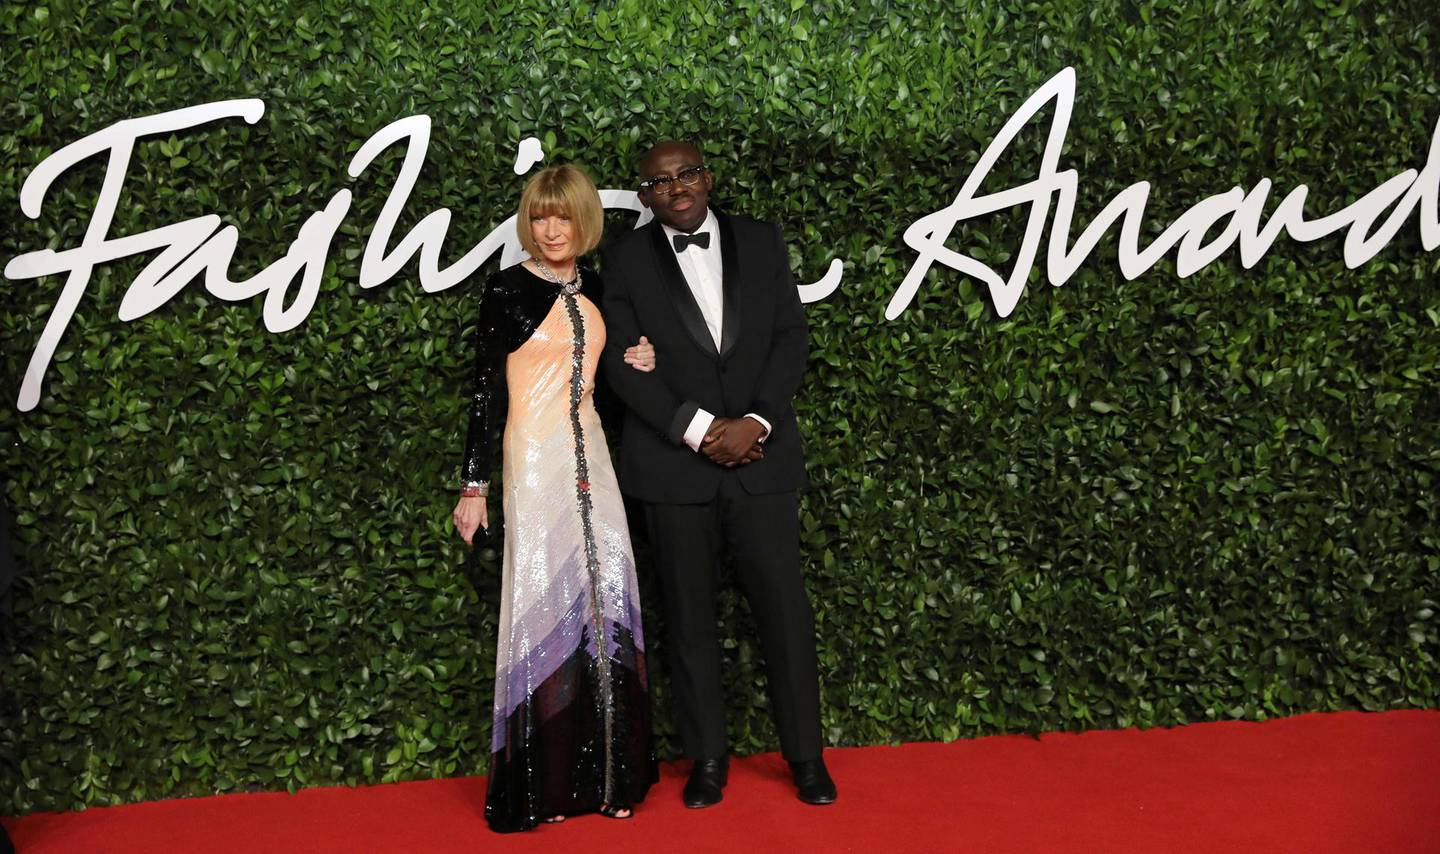 Vogue chief editor Anna Wintour (L) and British editor-in-chief of British Vogue magazine Edward Enninful  poses on the red carpet upon arrival at The Fashion Awards 2019 in London on December 2, 2019. The Fashion Awards are an annual celebration of creativity and innovation will shine a spotlight on exceptional individuals and influential businesses that have made significant contributions to the global fashion industry over the past twelve months. - RESTRICTED TO EDITORIAL USE -  NO MARKETING NO ADVERTISING CAMPAIGNS
 / AFP / ISABEL INFANTES / RESTRICTED TO EDITORIAL USE -  NO MARKETING NO ADVERTISING CAMPAIGNS
